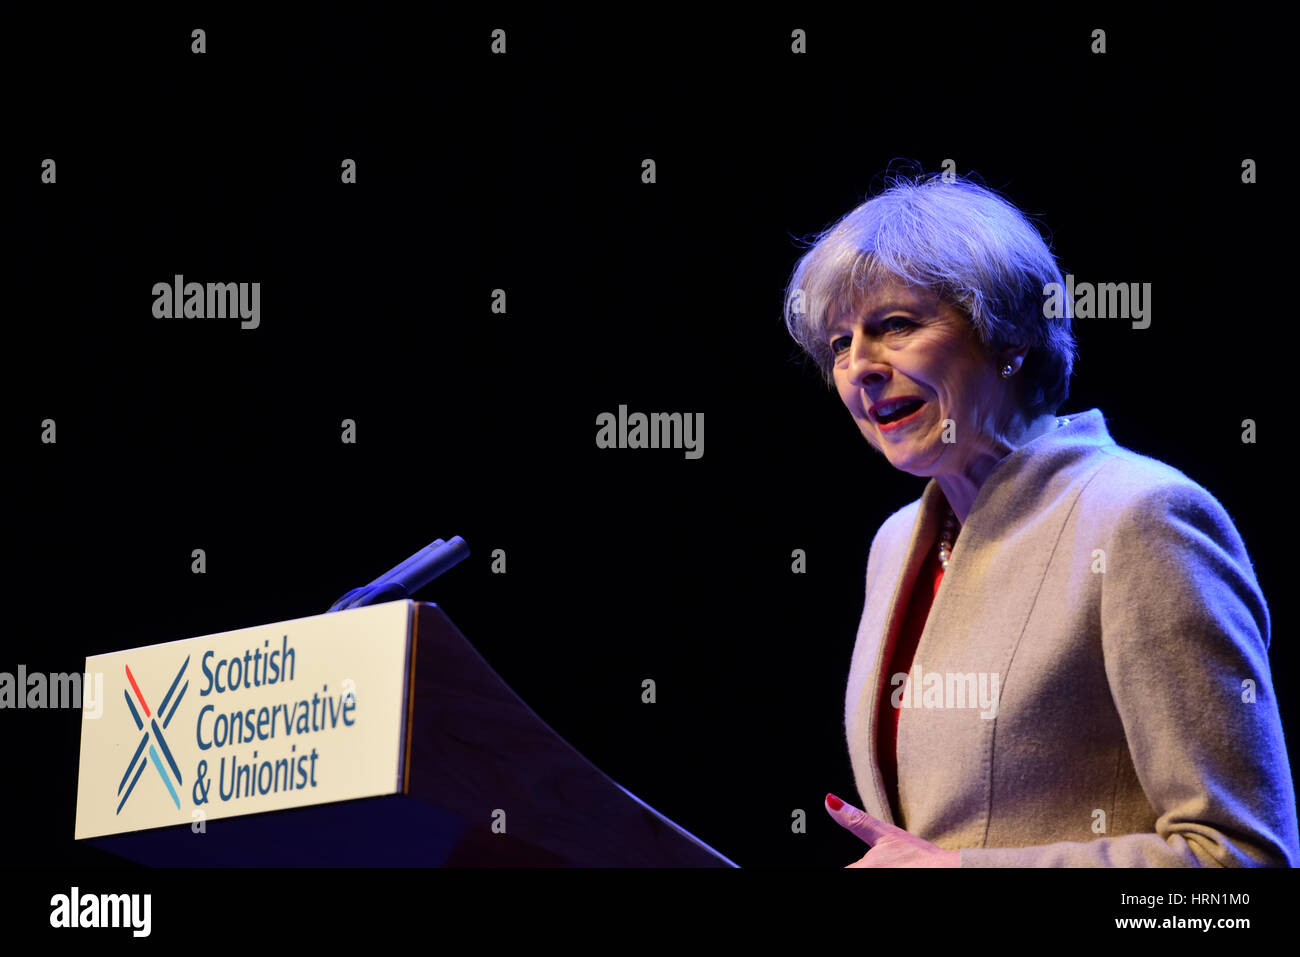 Glasgow, Scotland, UK. 3rd March 2017. Prime Minister Theresa May addresses the Scottish Conservative Party spring conference, Credit: Ken Jack/Alamy Live News Stock Photo